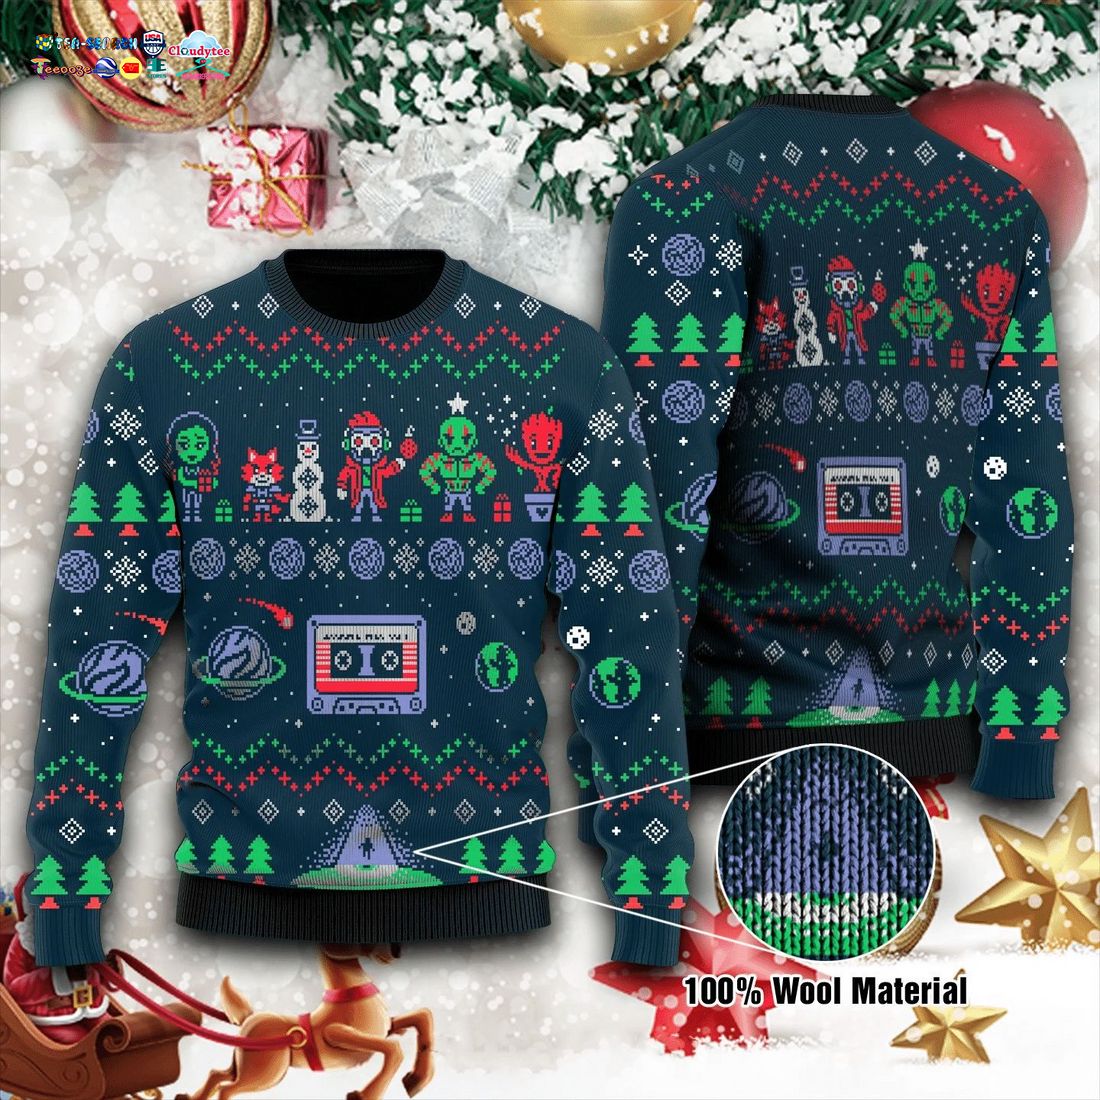 the-guardians-of-the-galaxy-holiday-mix-vol-1-ugly-christmas-sweater-1-p4Zdo.jpg